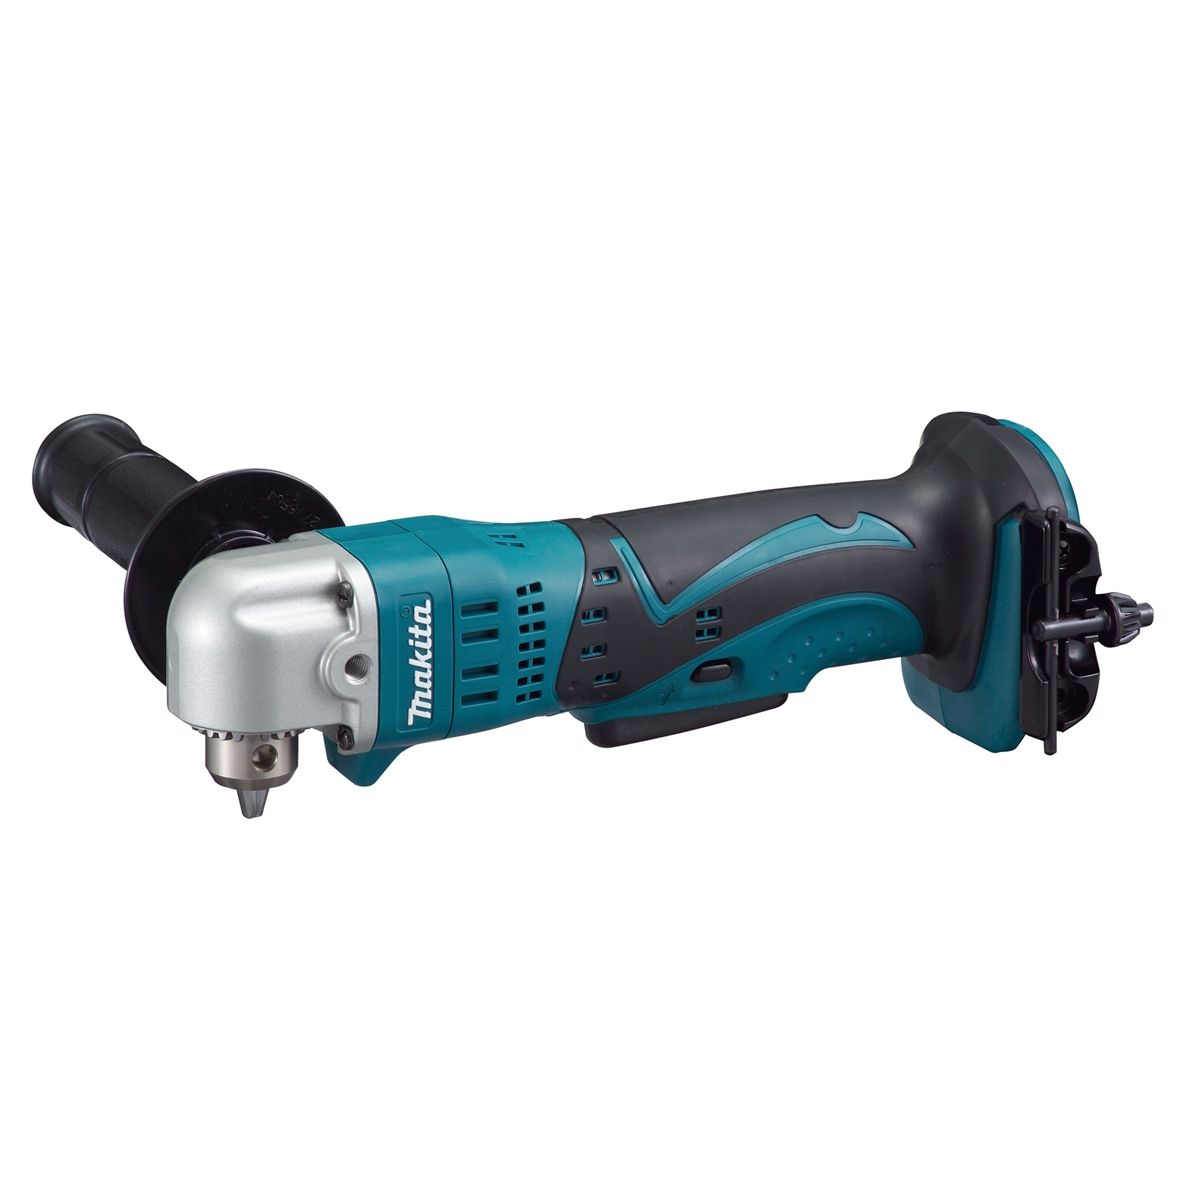 18V LXT 3/8 Inch Angle Drill Tool Only